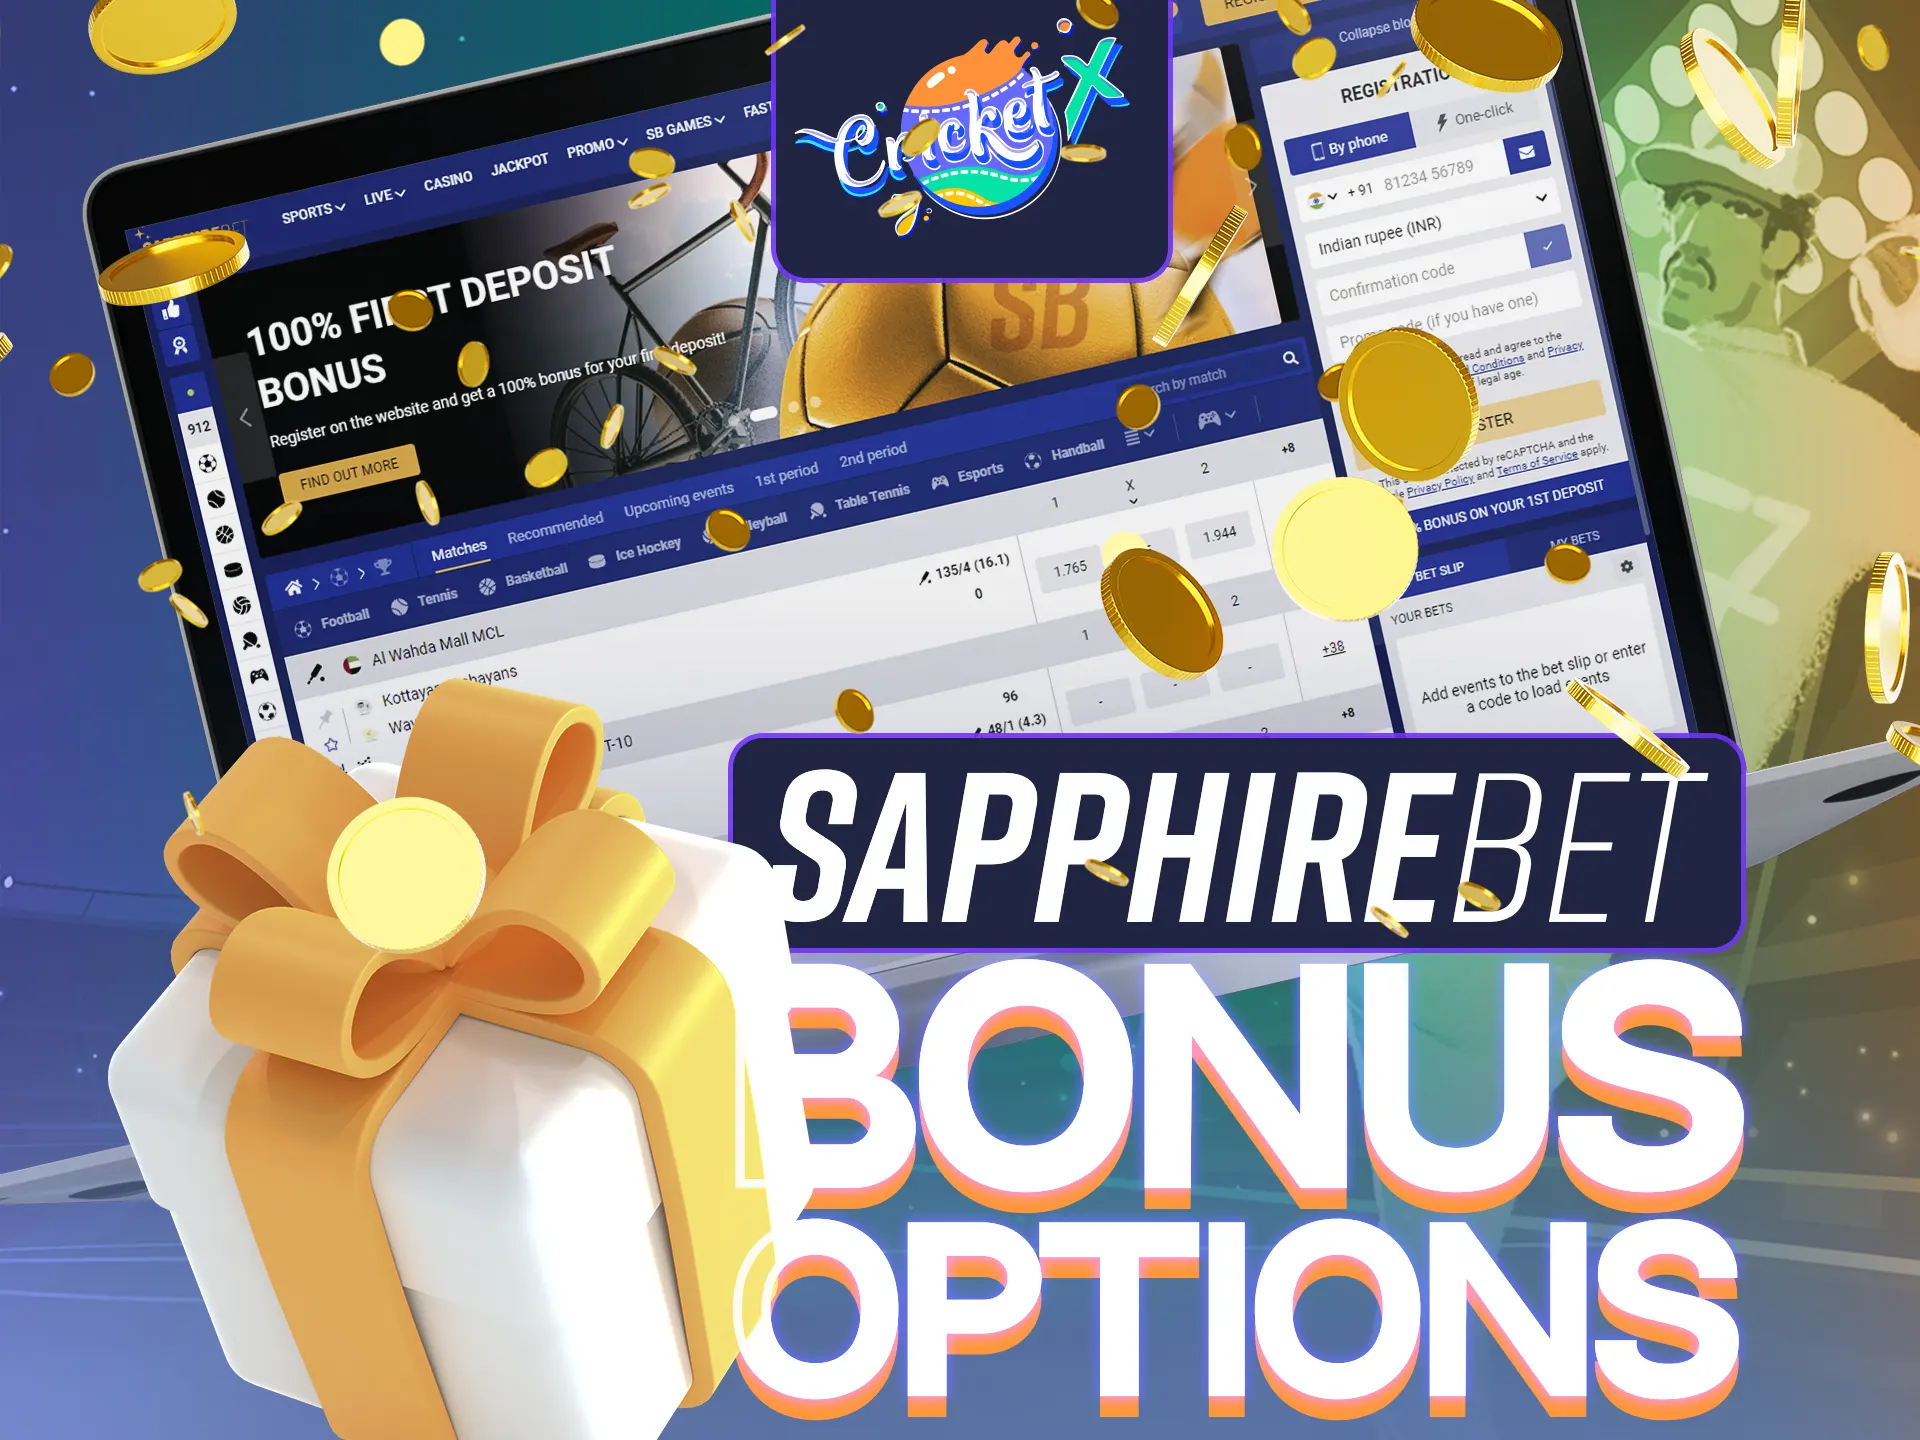 SapphireBet offers enticing bonuses for Cricket X players.